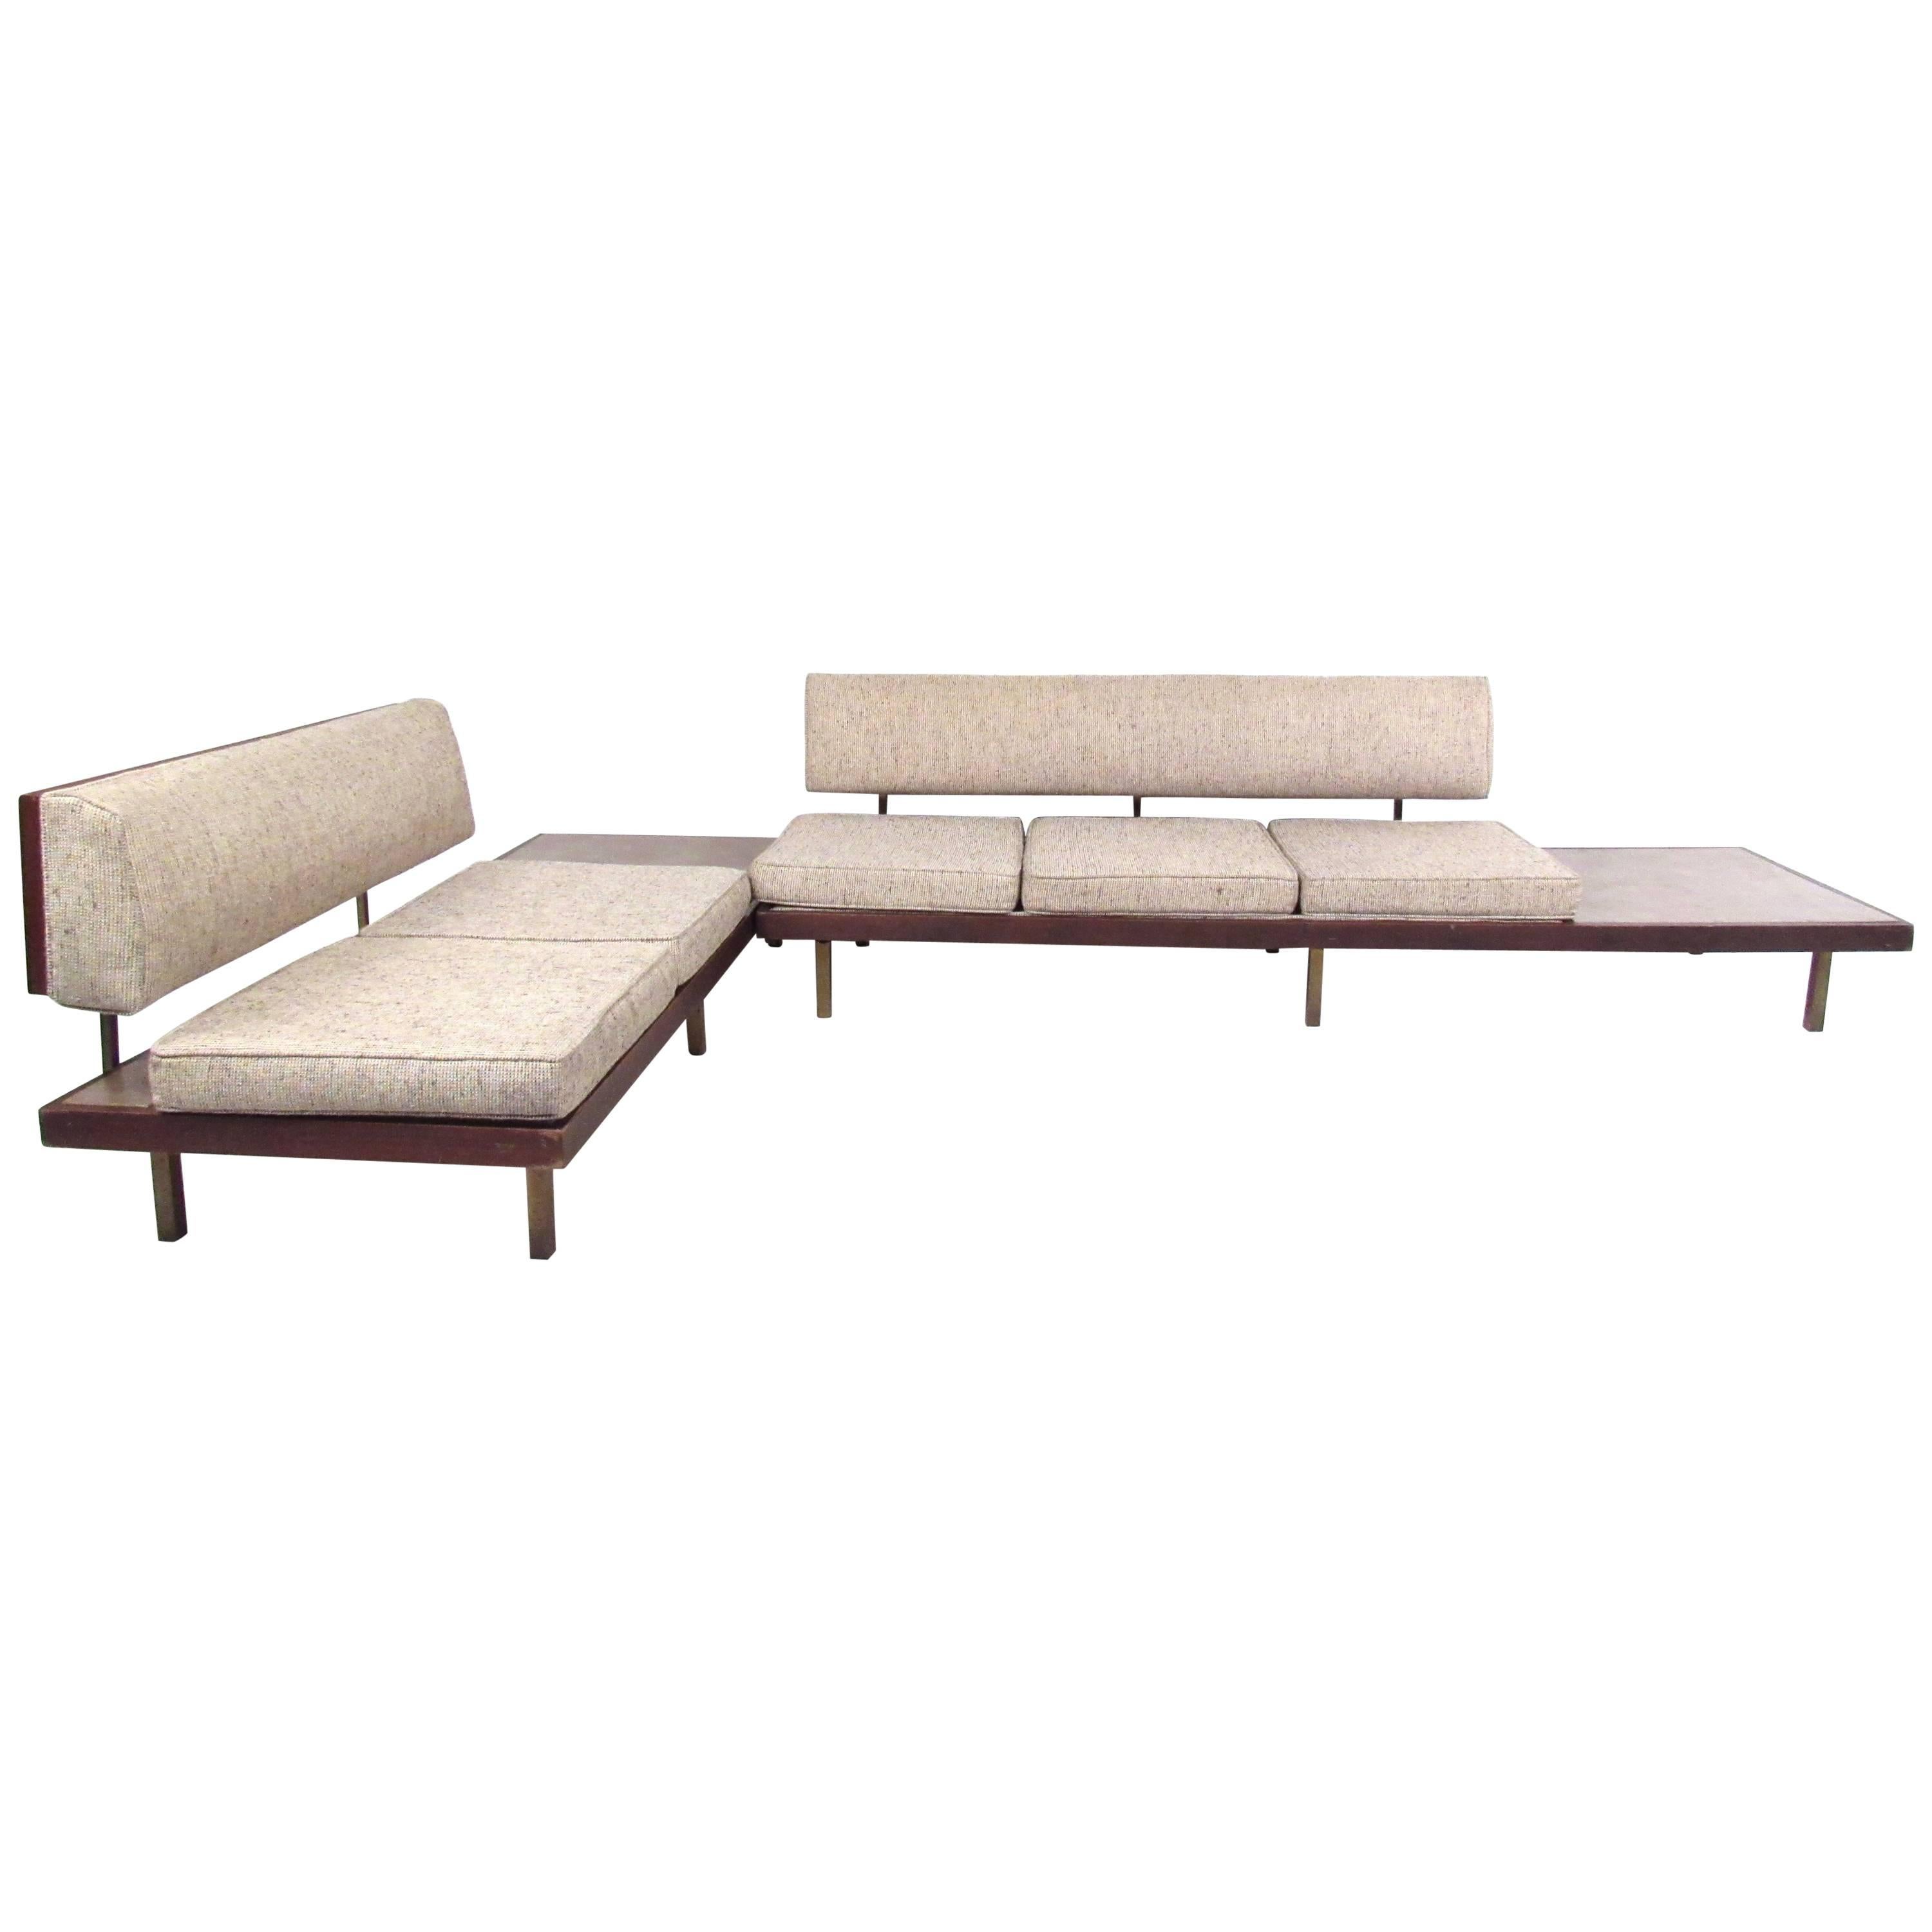 Pair of Mid-Century Modern Sofas with End Tables